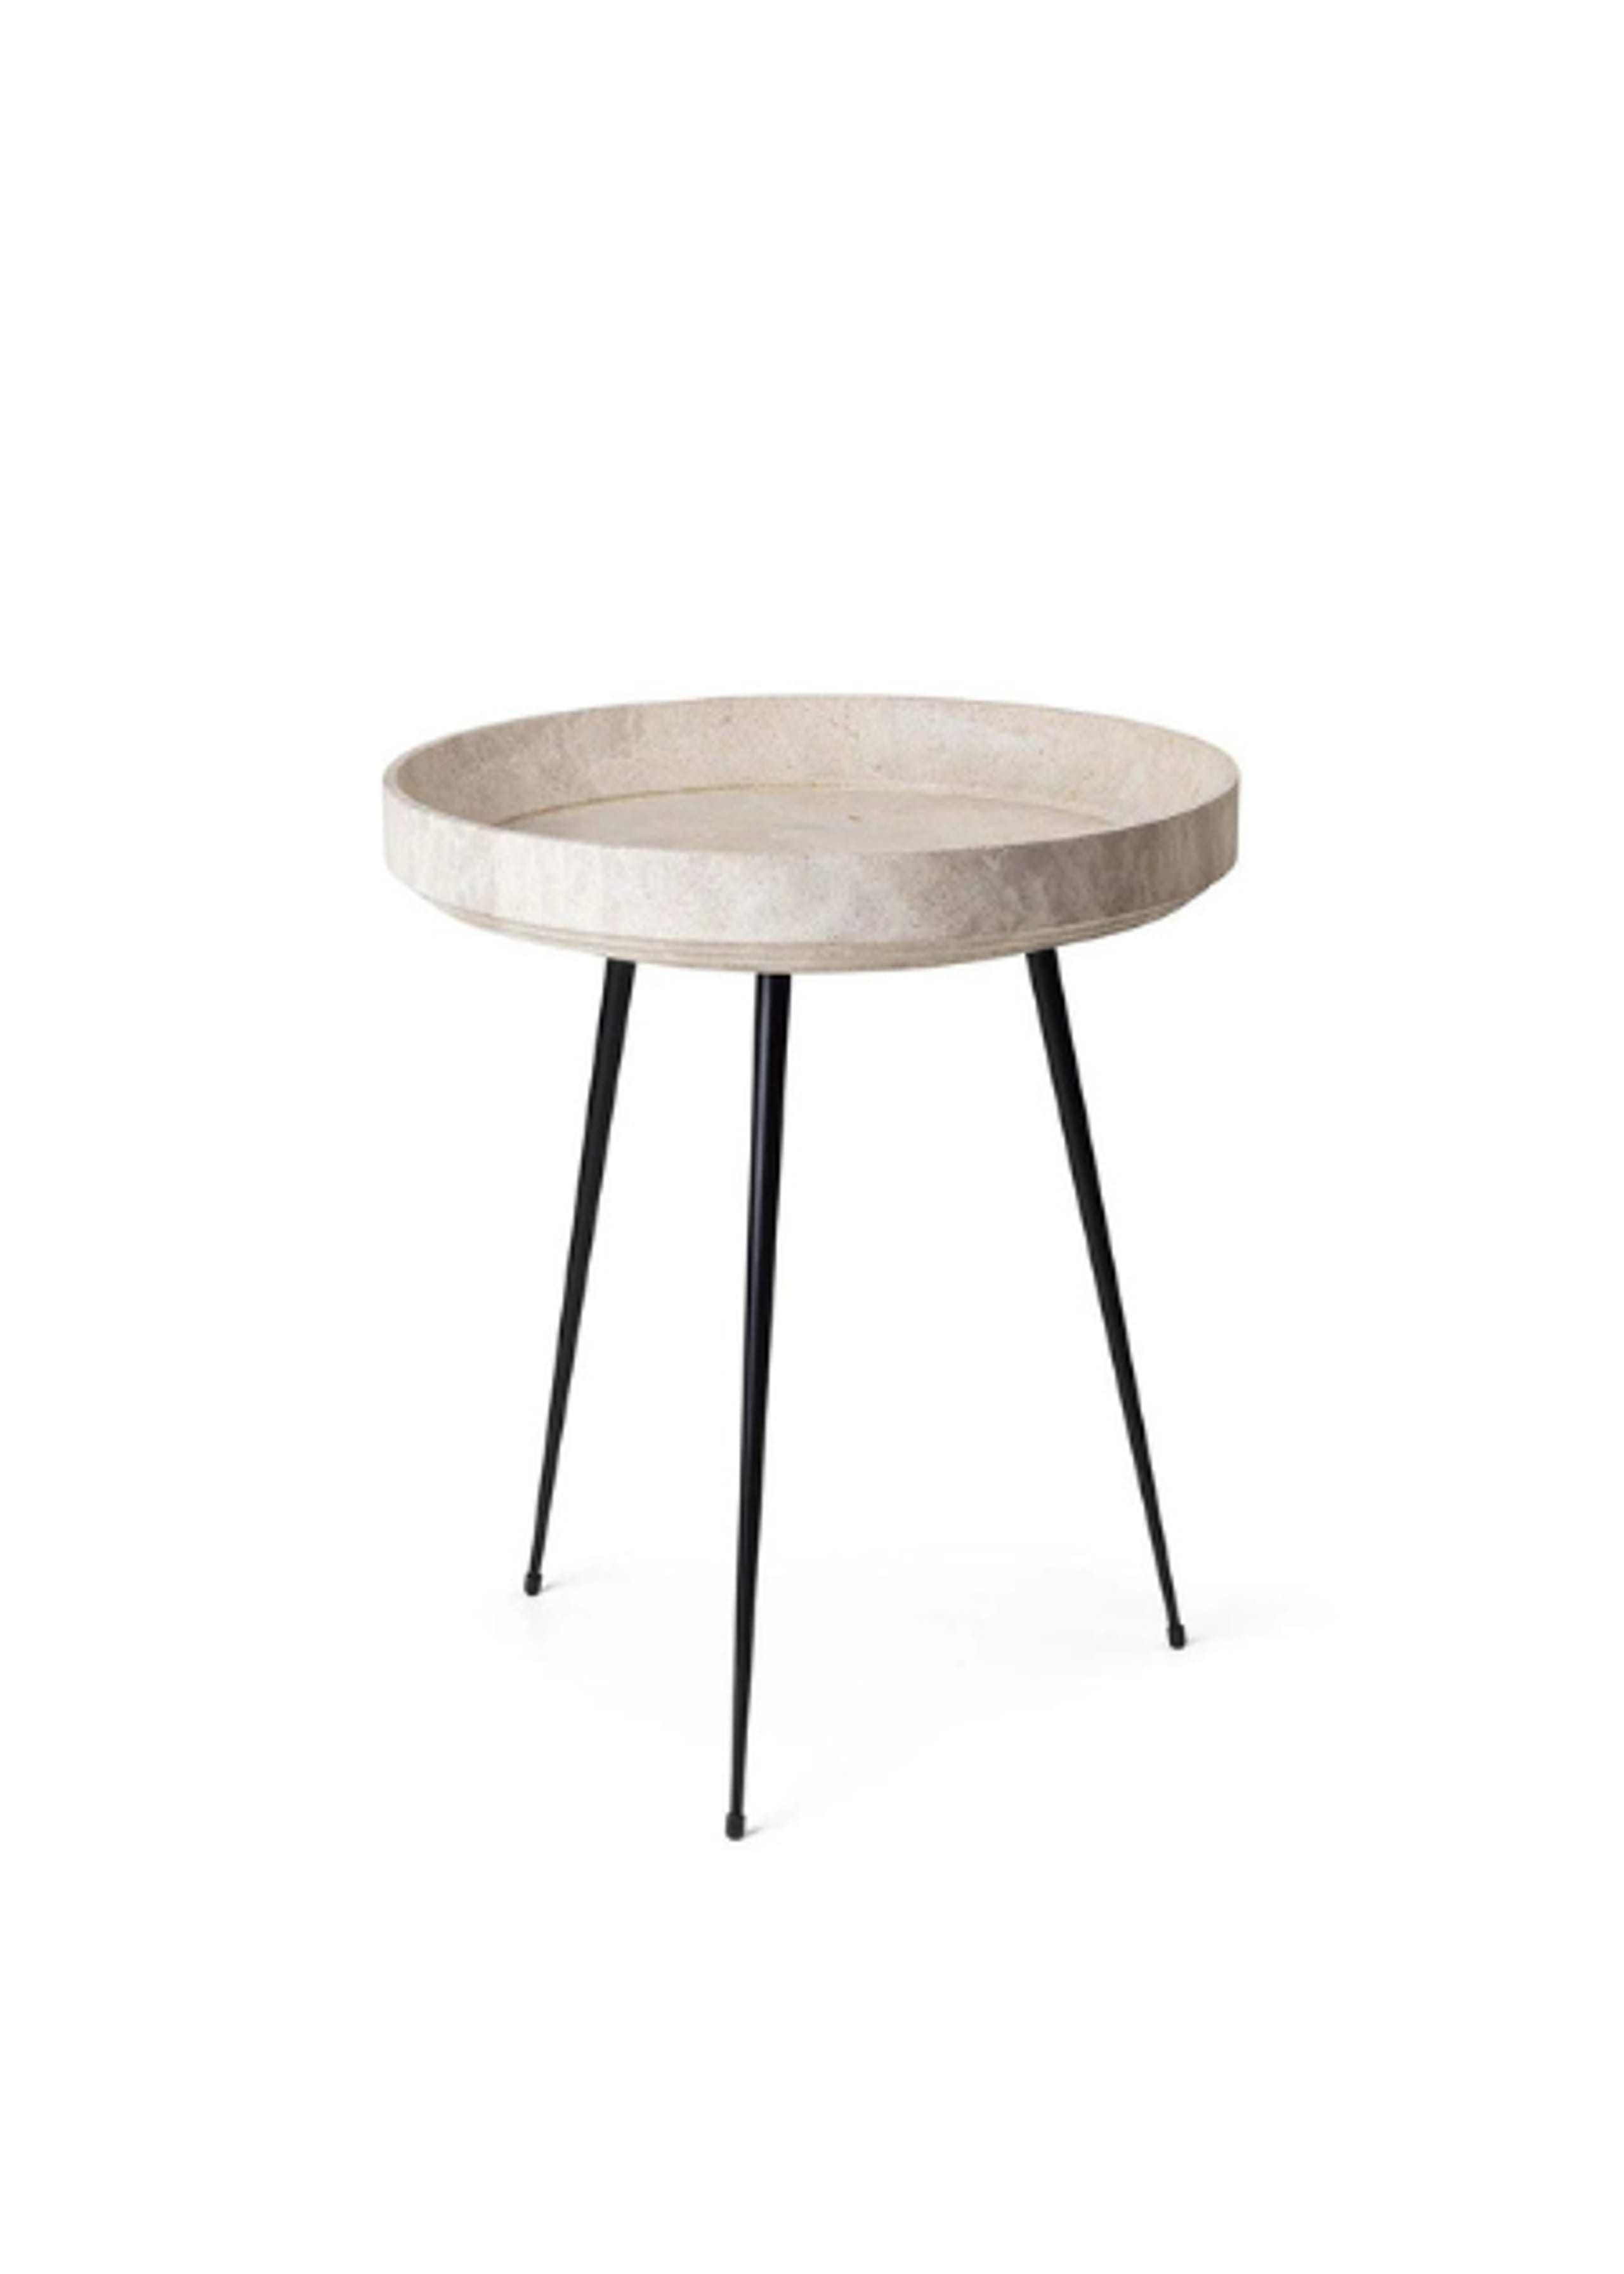 Mater - Table - Bowl Table - Grey Waste - Medium